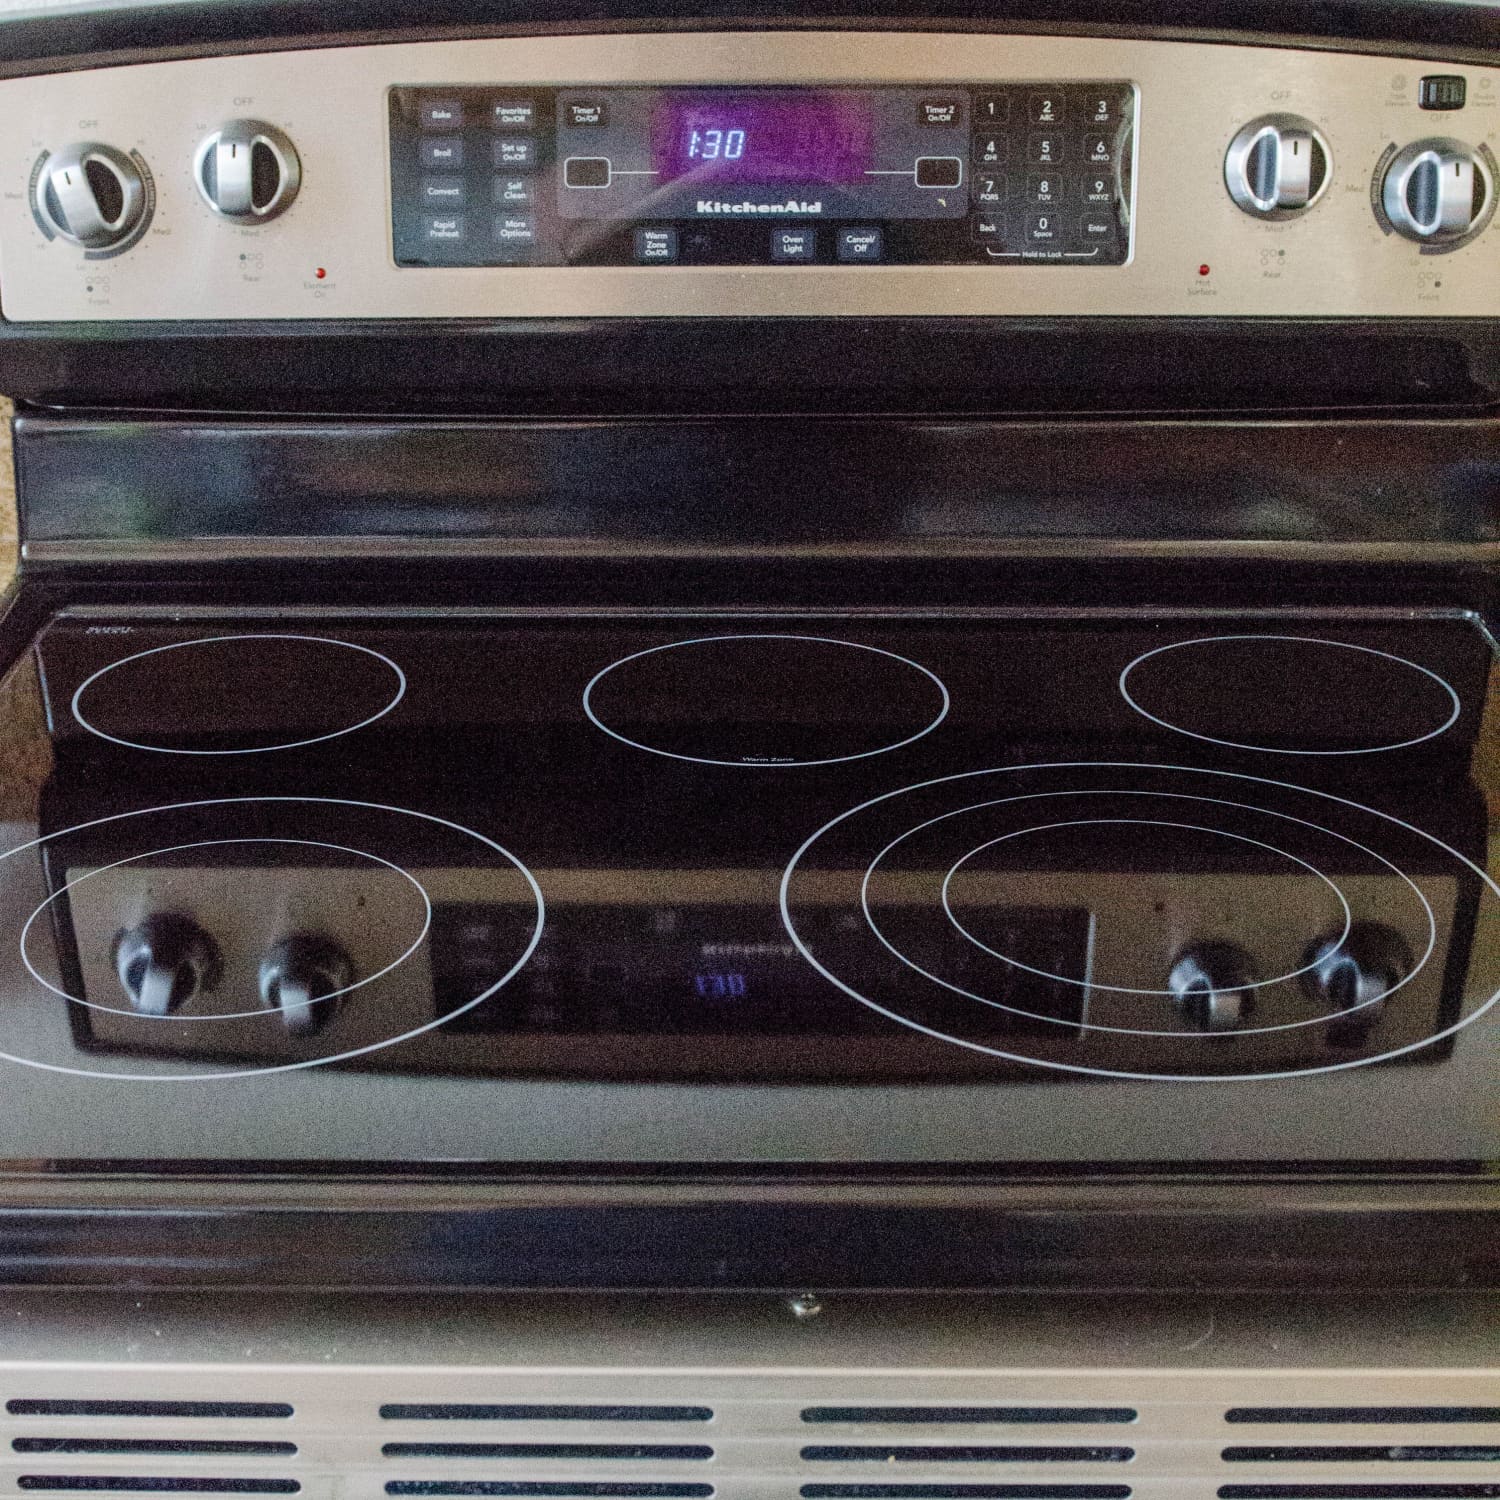 How to Clean an Electric Stove